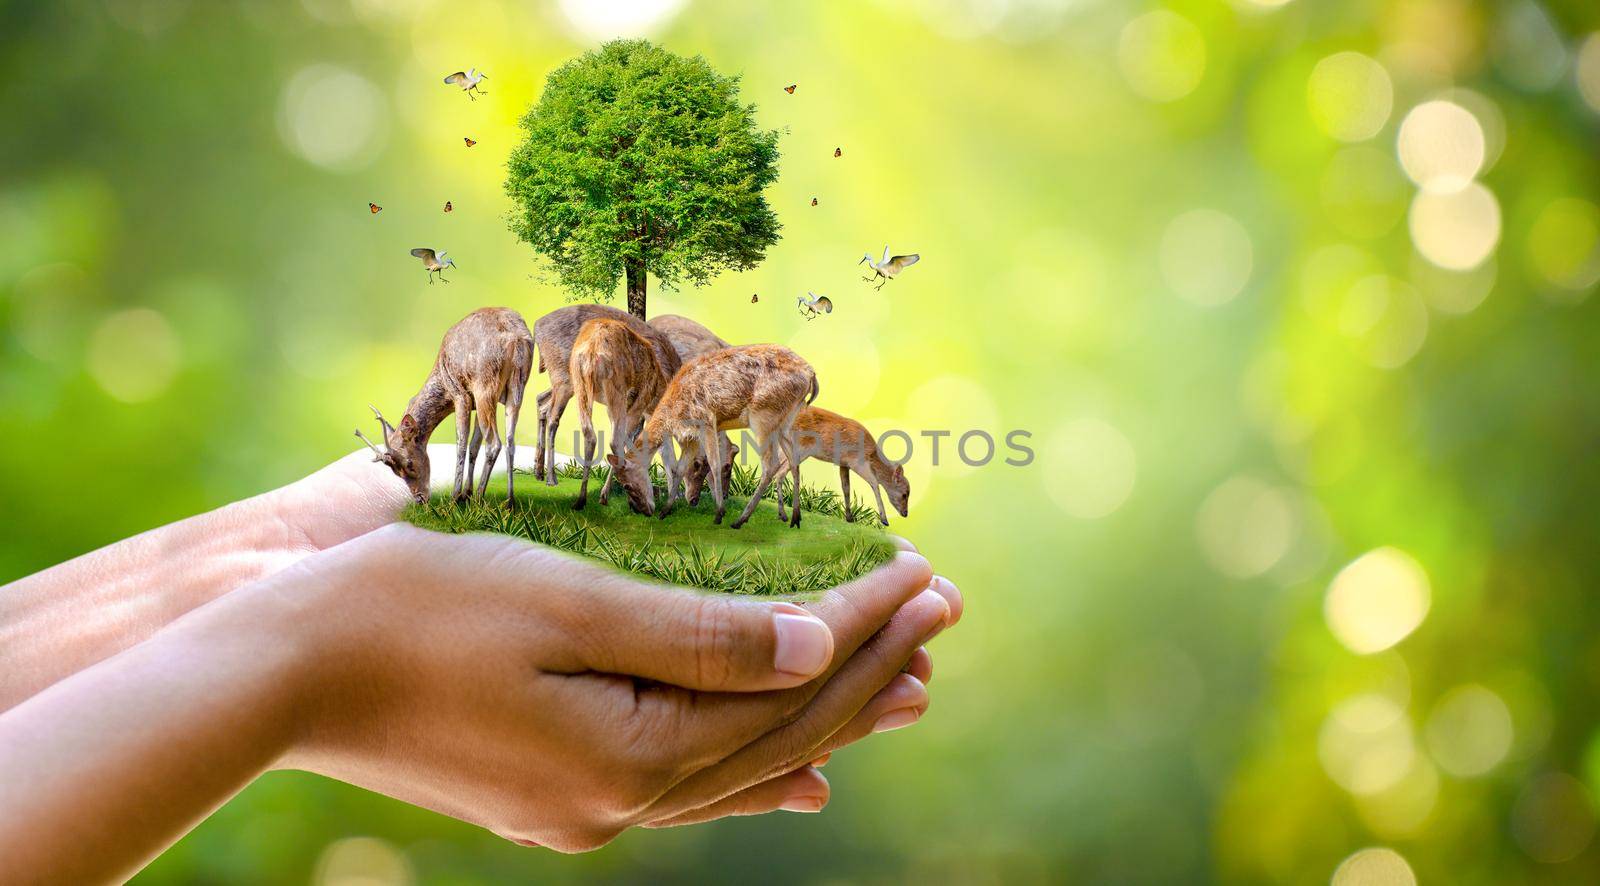 Concept Nature reserve conserve Wildlife reserve tiger Deer Global warming Food Loaf Ecology Human hands protecting the wild and wild animals tigers deer, trees in the hands green background Sun light by sarayut_thaneerat